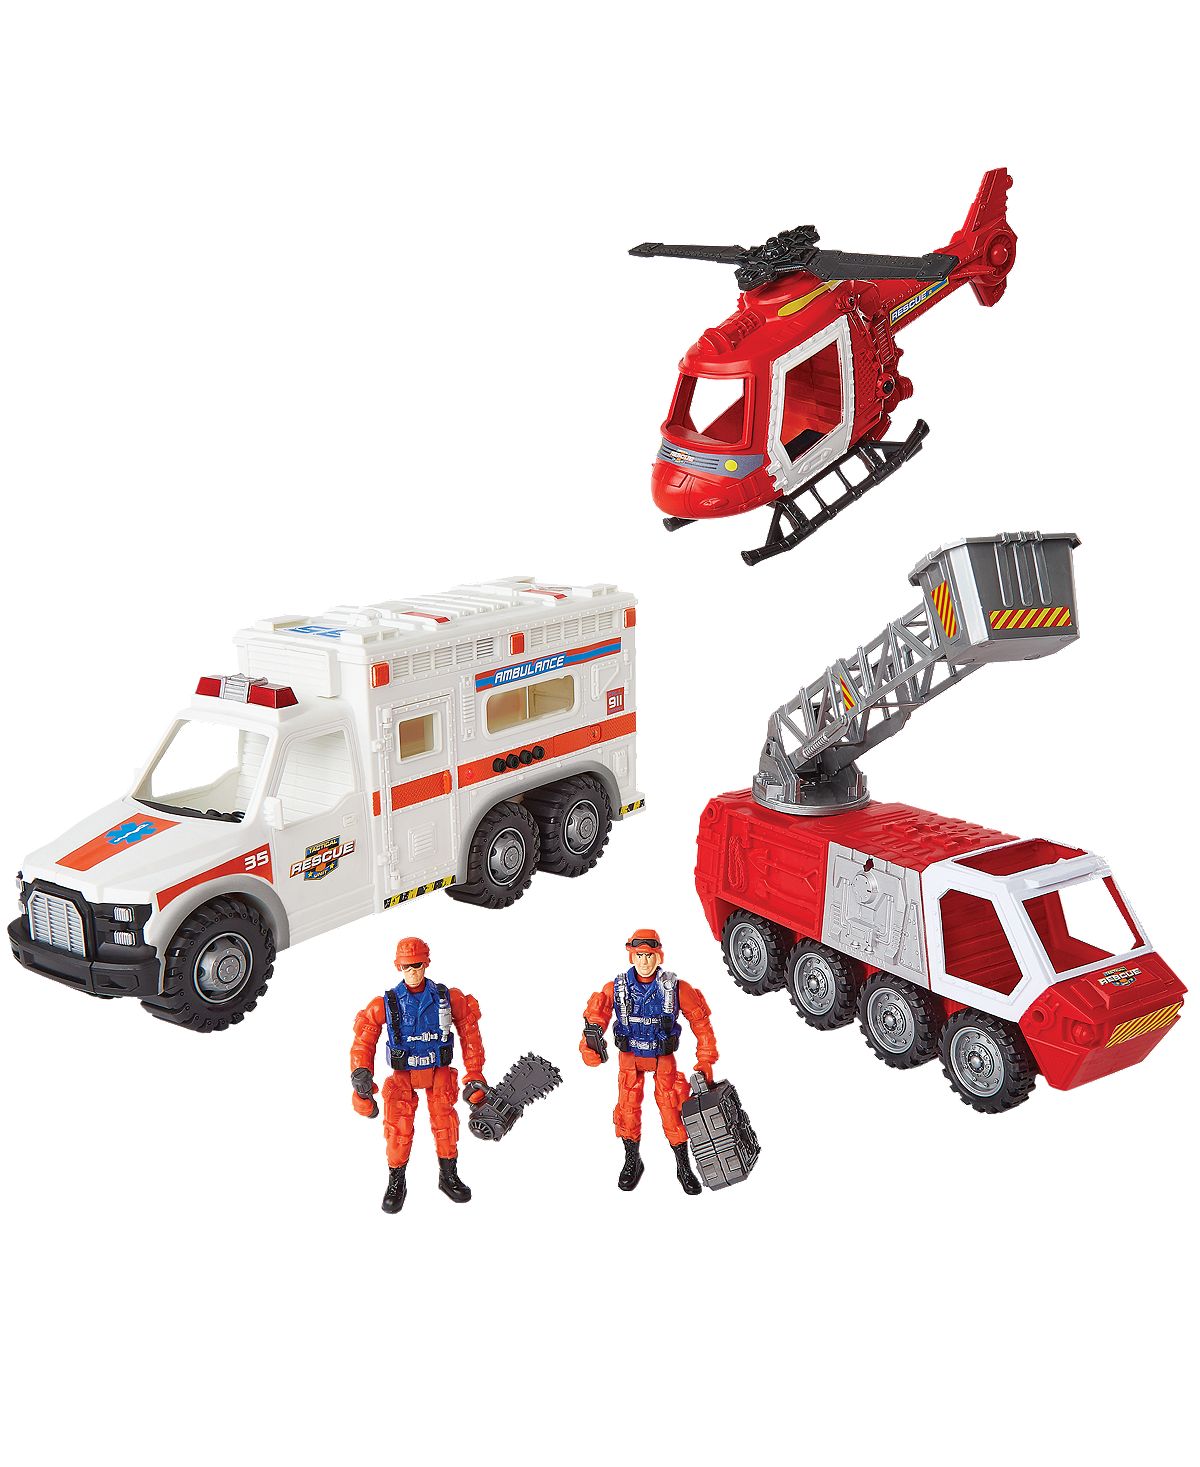 True Heroes Fire-Rescue Playset with Lights and Sounds - Toys R Us Exclusive